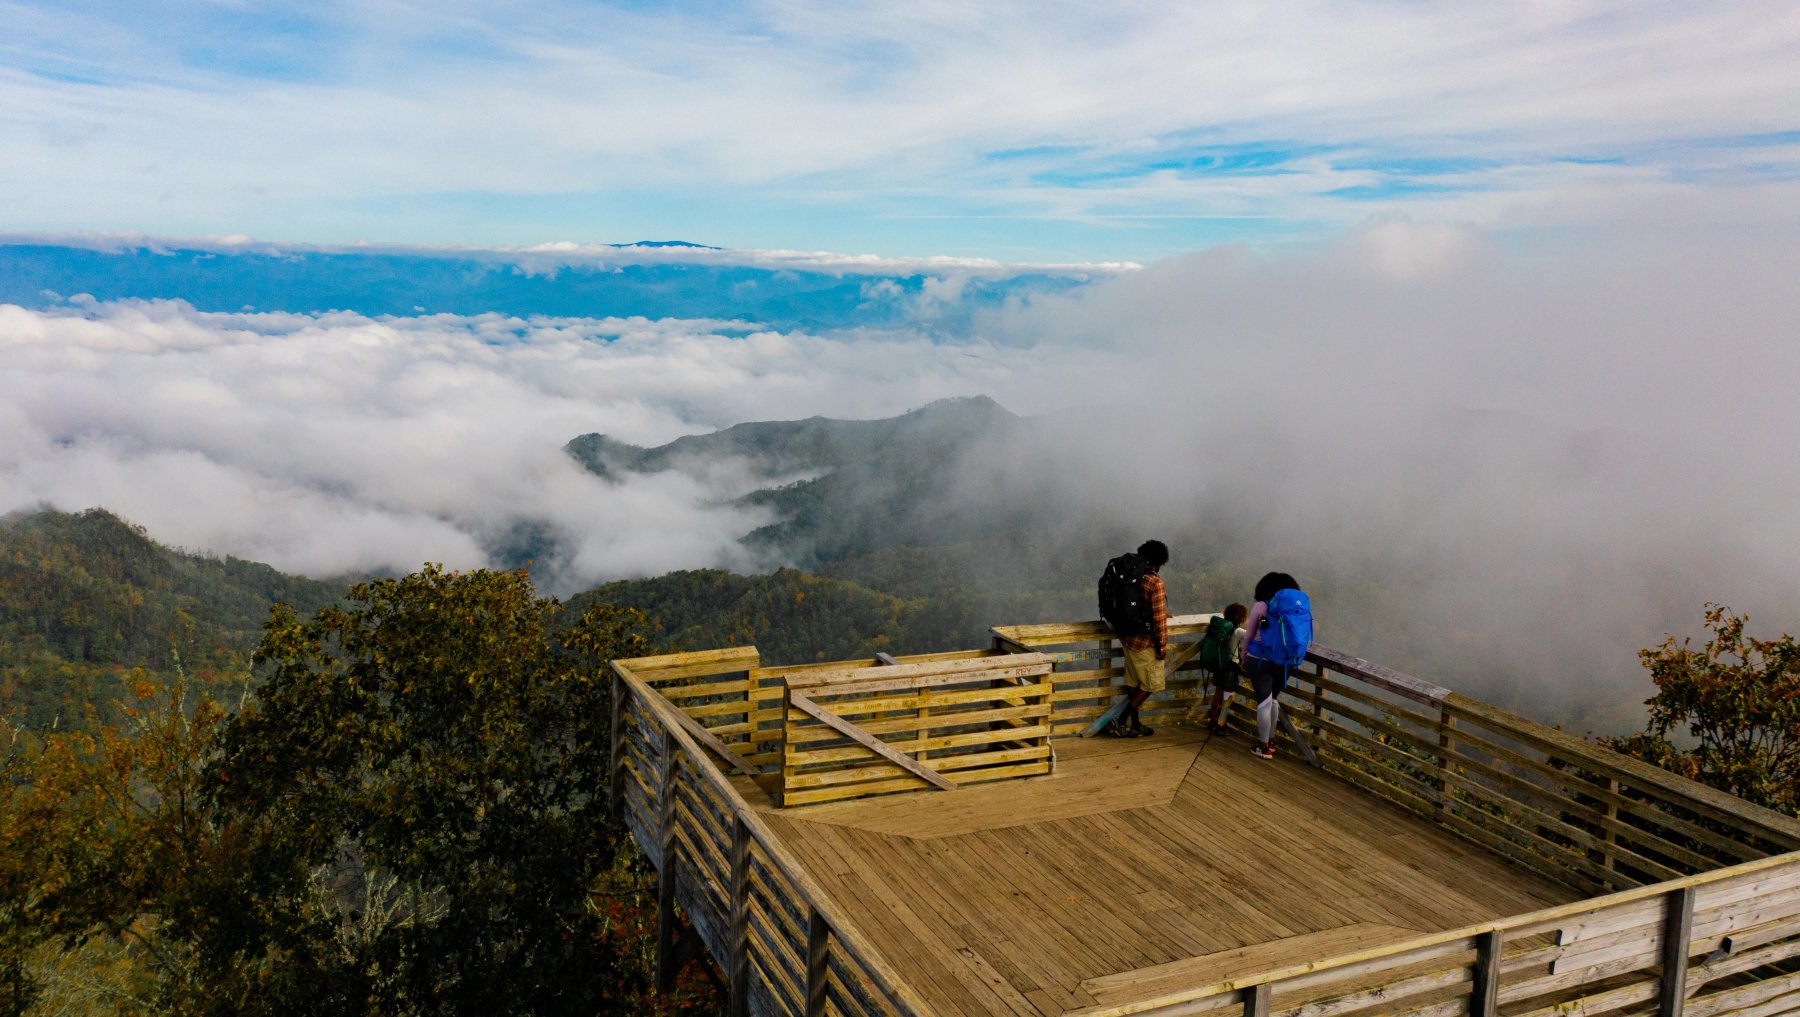 Family standing on top of wood tower overlooking mountains with low clouds